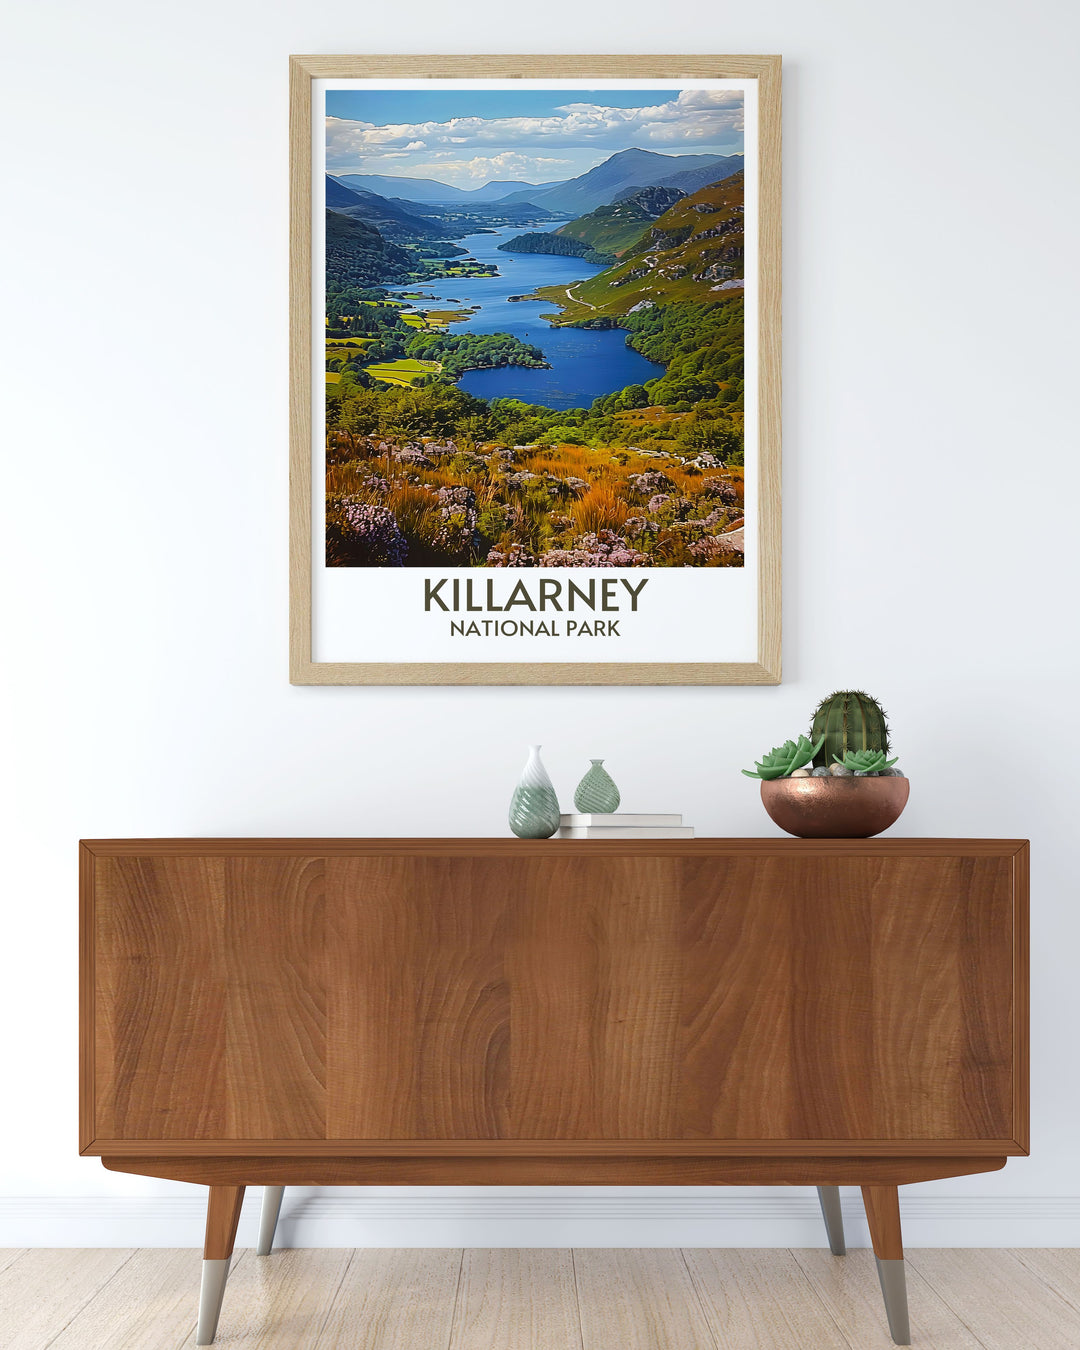 Art print of Ladies View, offering stunning vistas over Killarneys lakes and mountains, perfect for a serene home decor theme